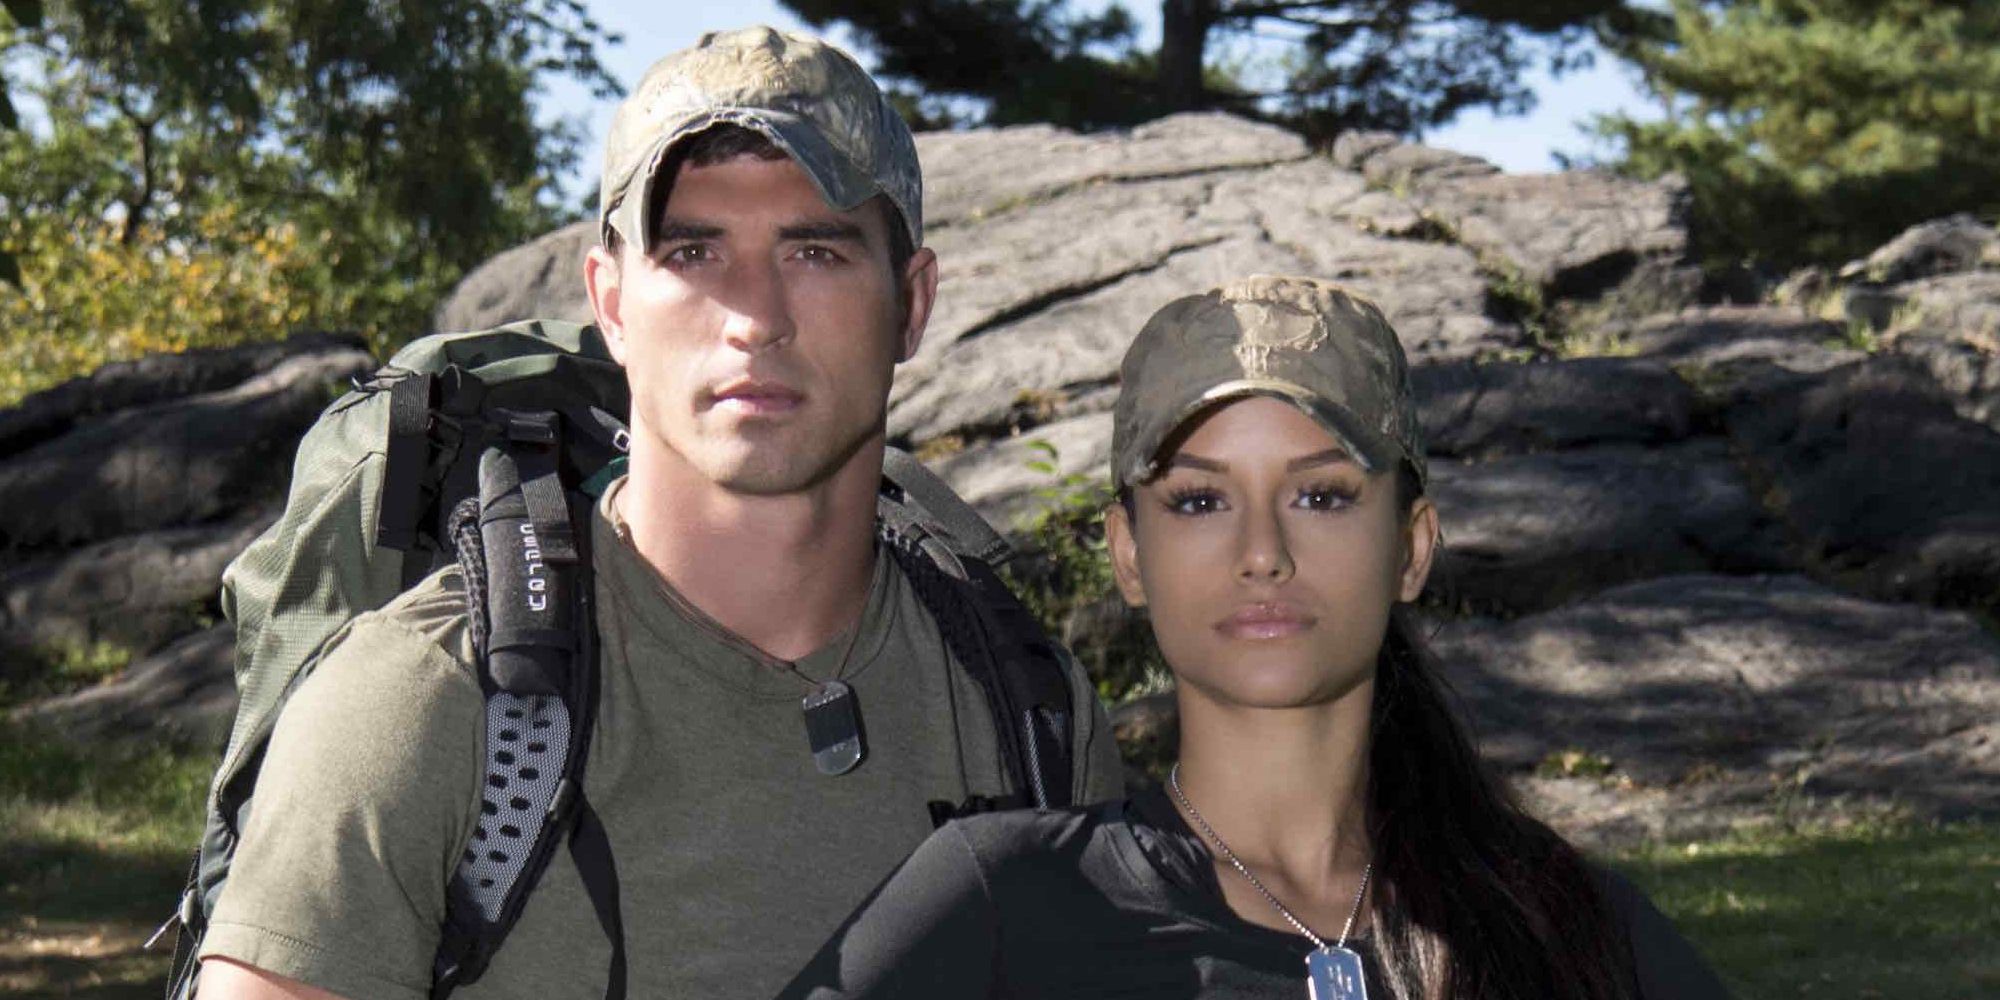 Cody and Jessica posing for the camera on The Amazing Race